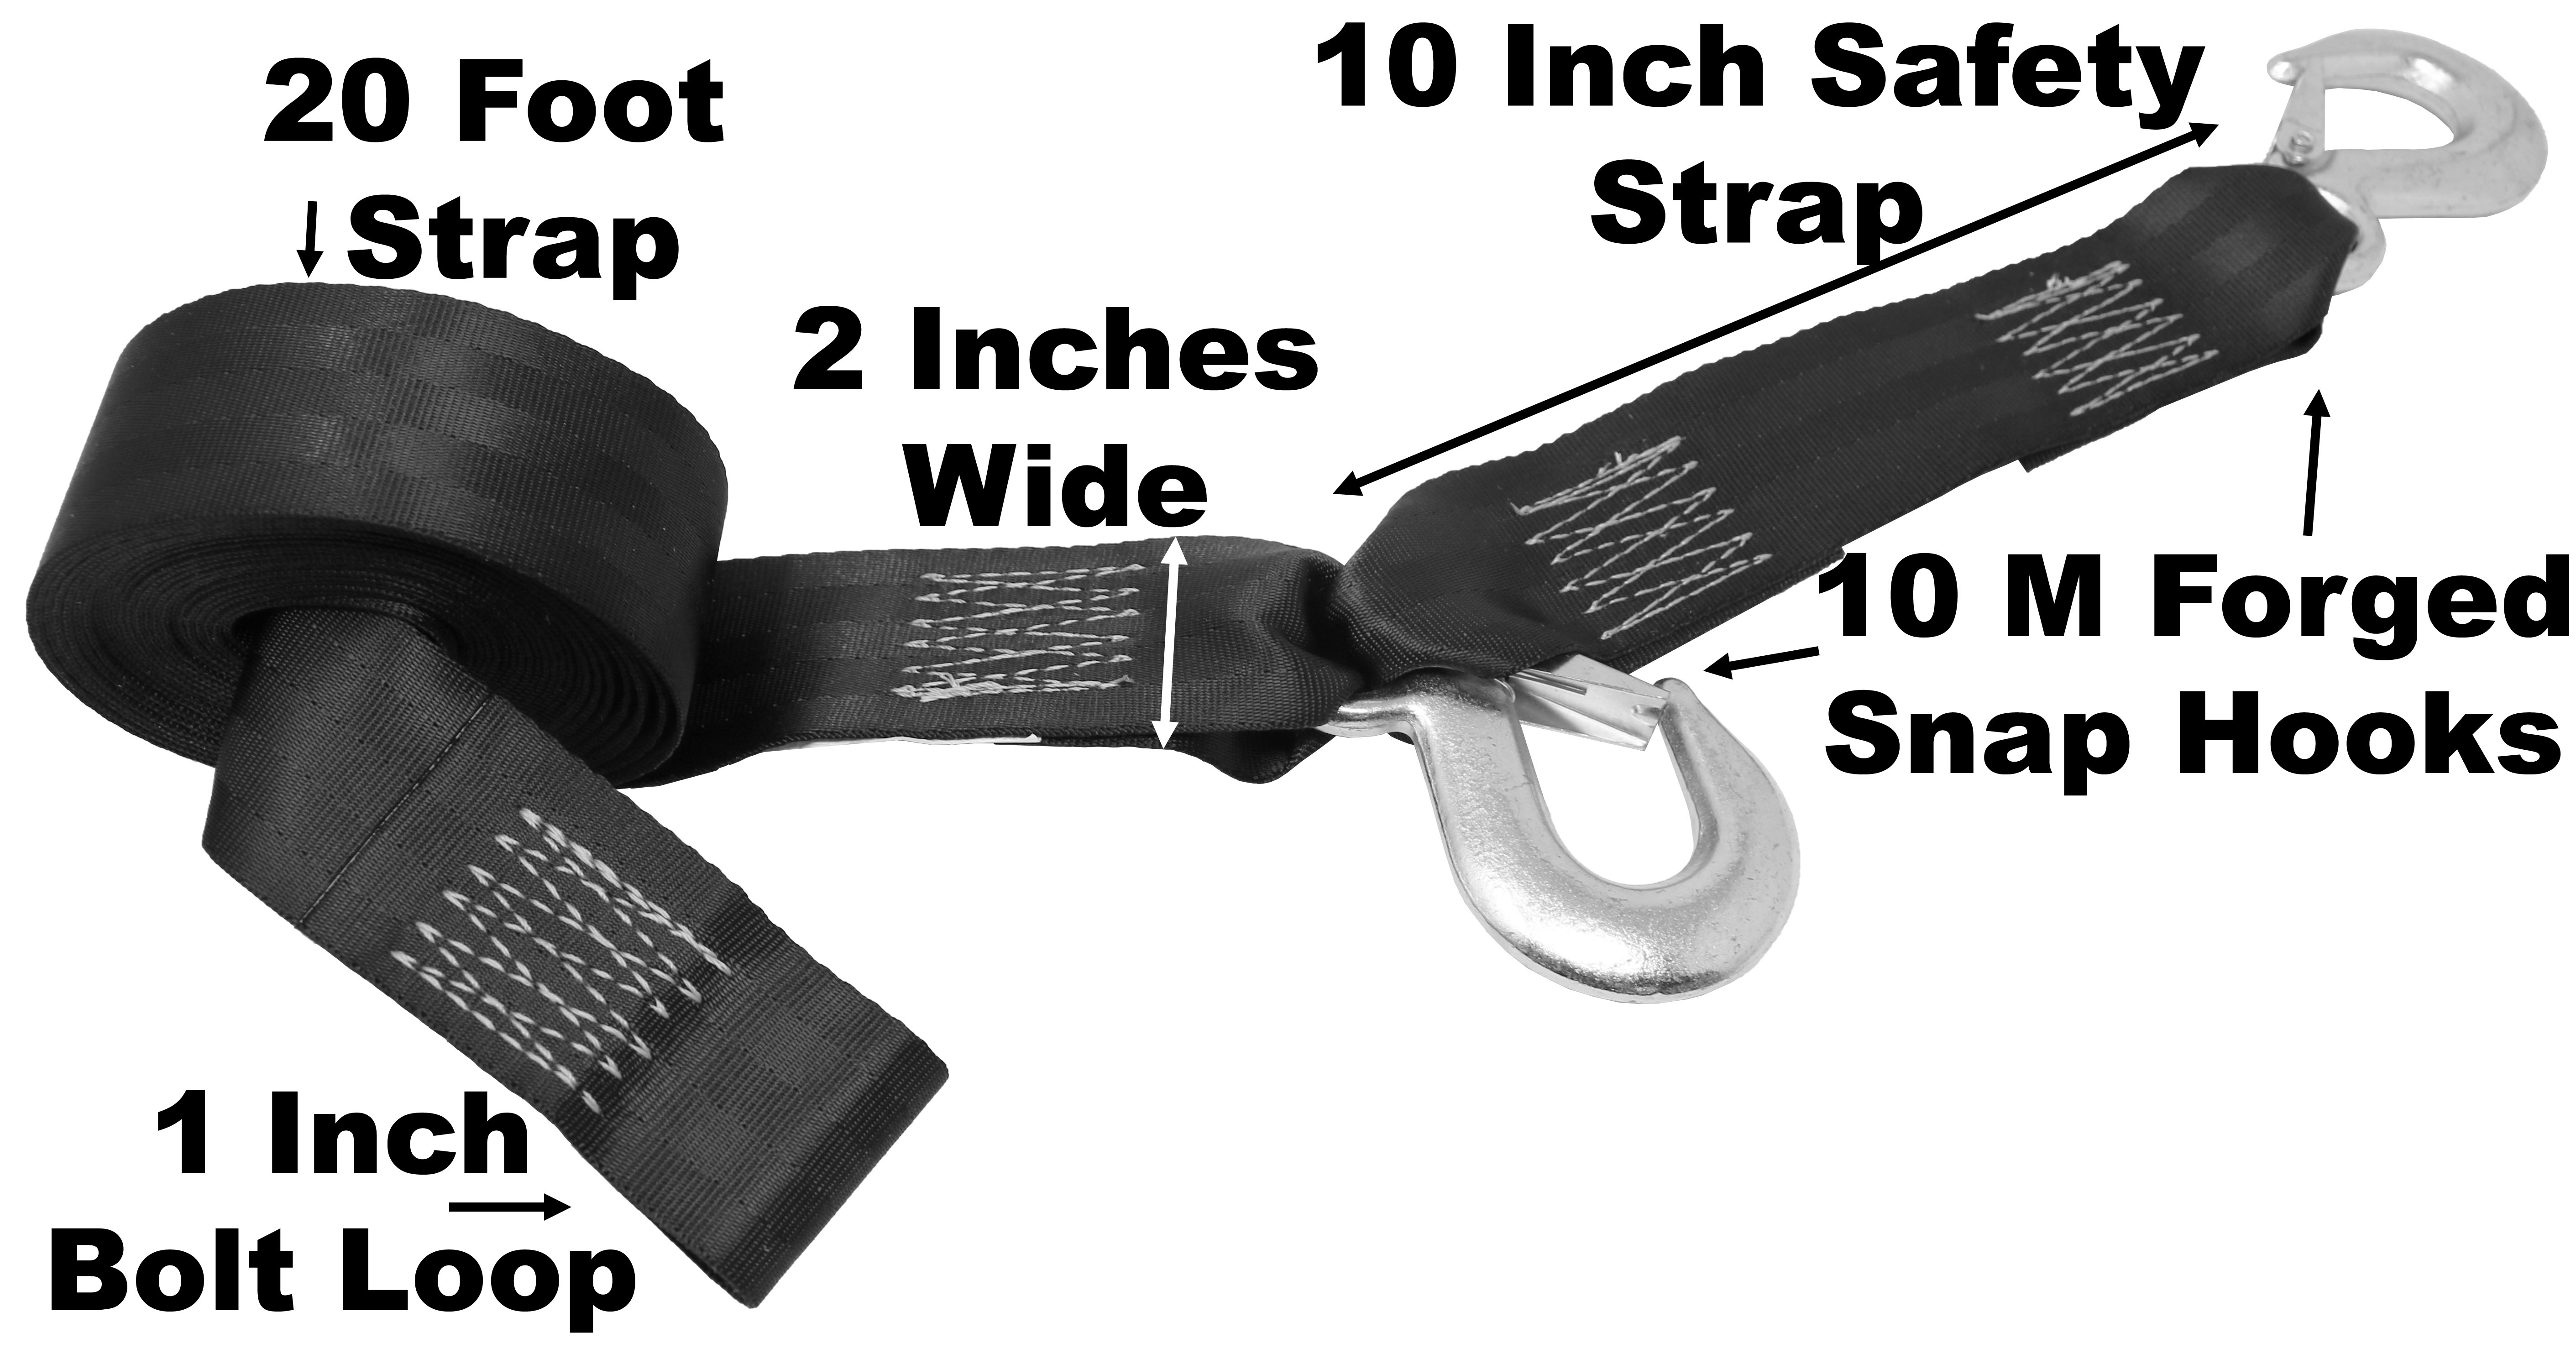 CustomTieDowns 2 Inch x 20 Foot Black Winch Strap With A Forged Snap Hook.  10 Inch Safety Strap With A Snap Hook. 1 Inch Loop For Attachment To Winch. - image 3 of 3